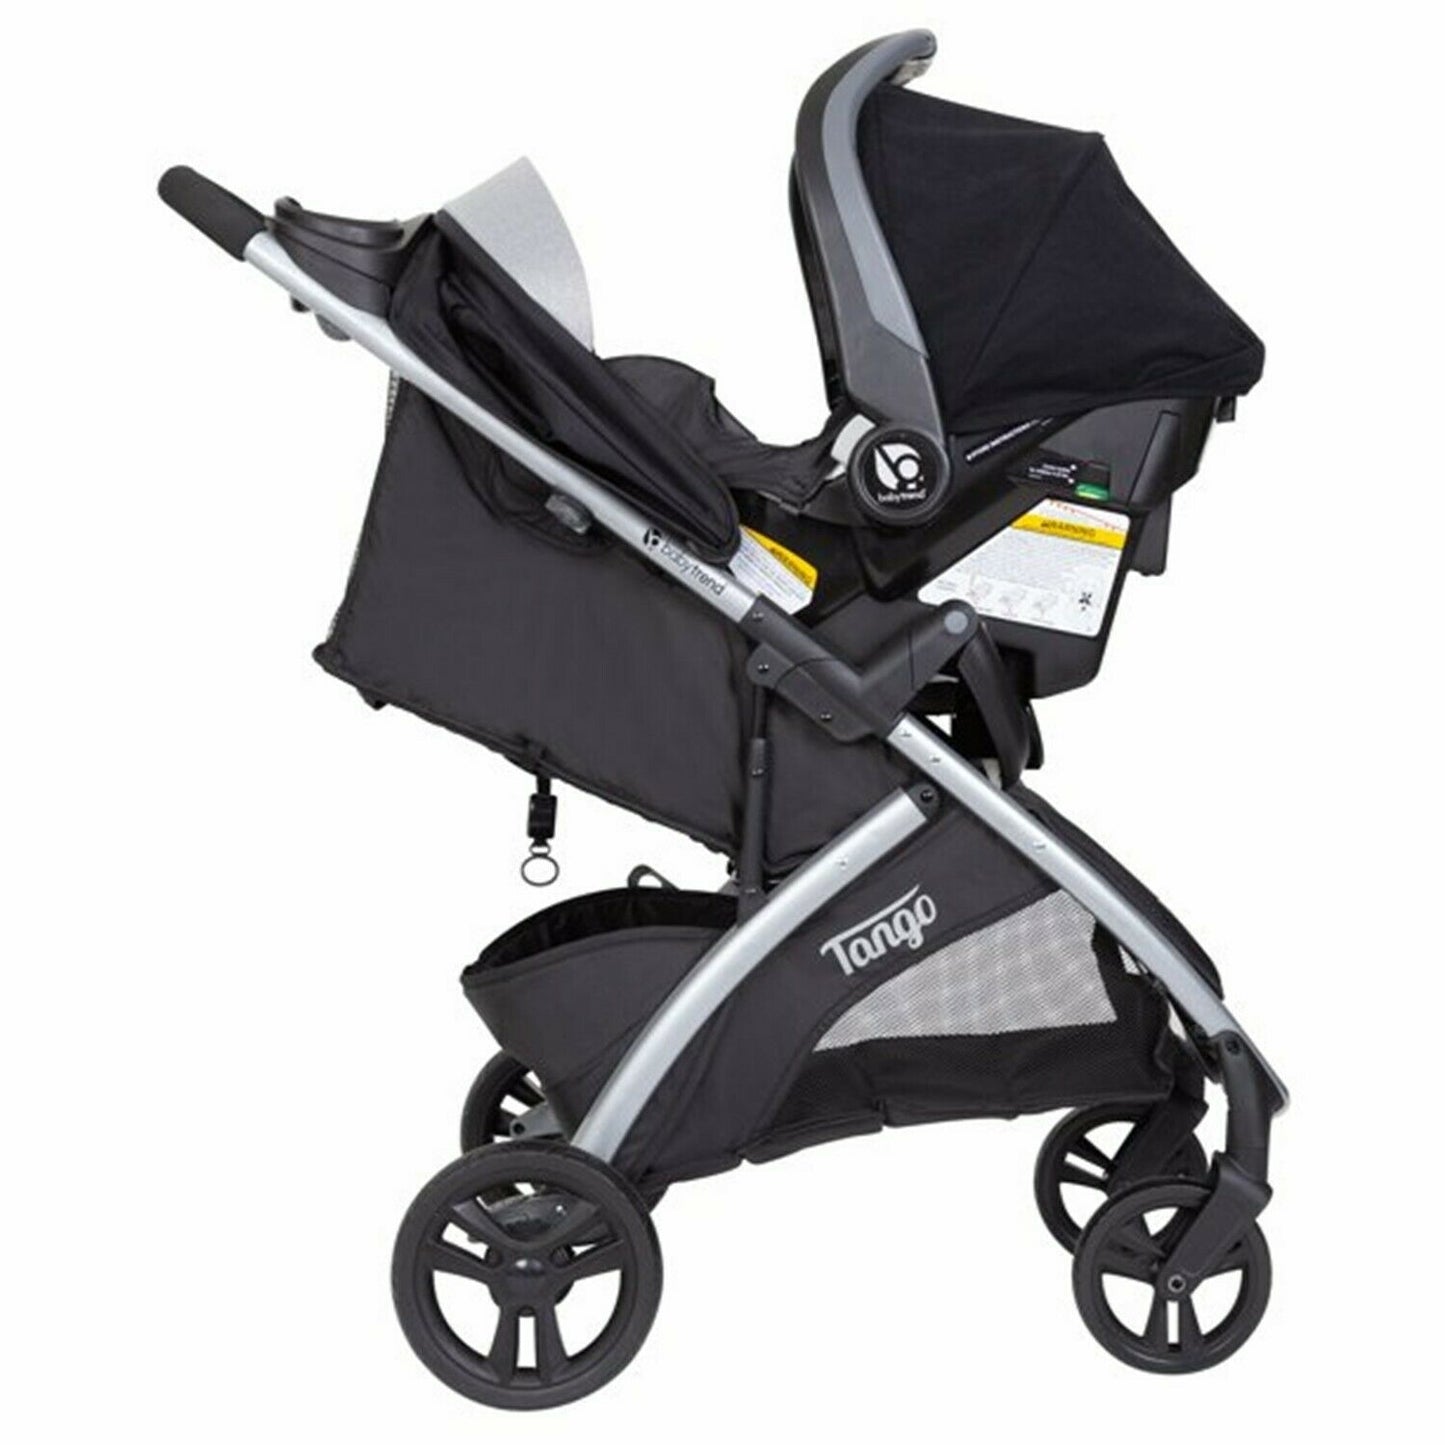 Baby Trend Stroller with Car Seat Travel System Playard Infans High Chair Combo